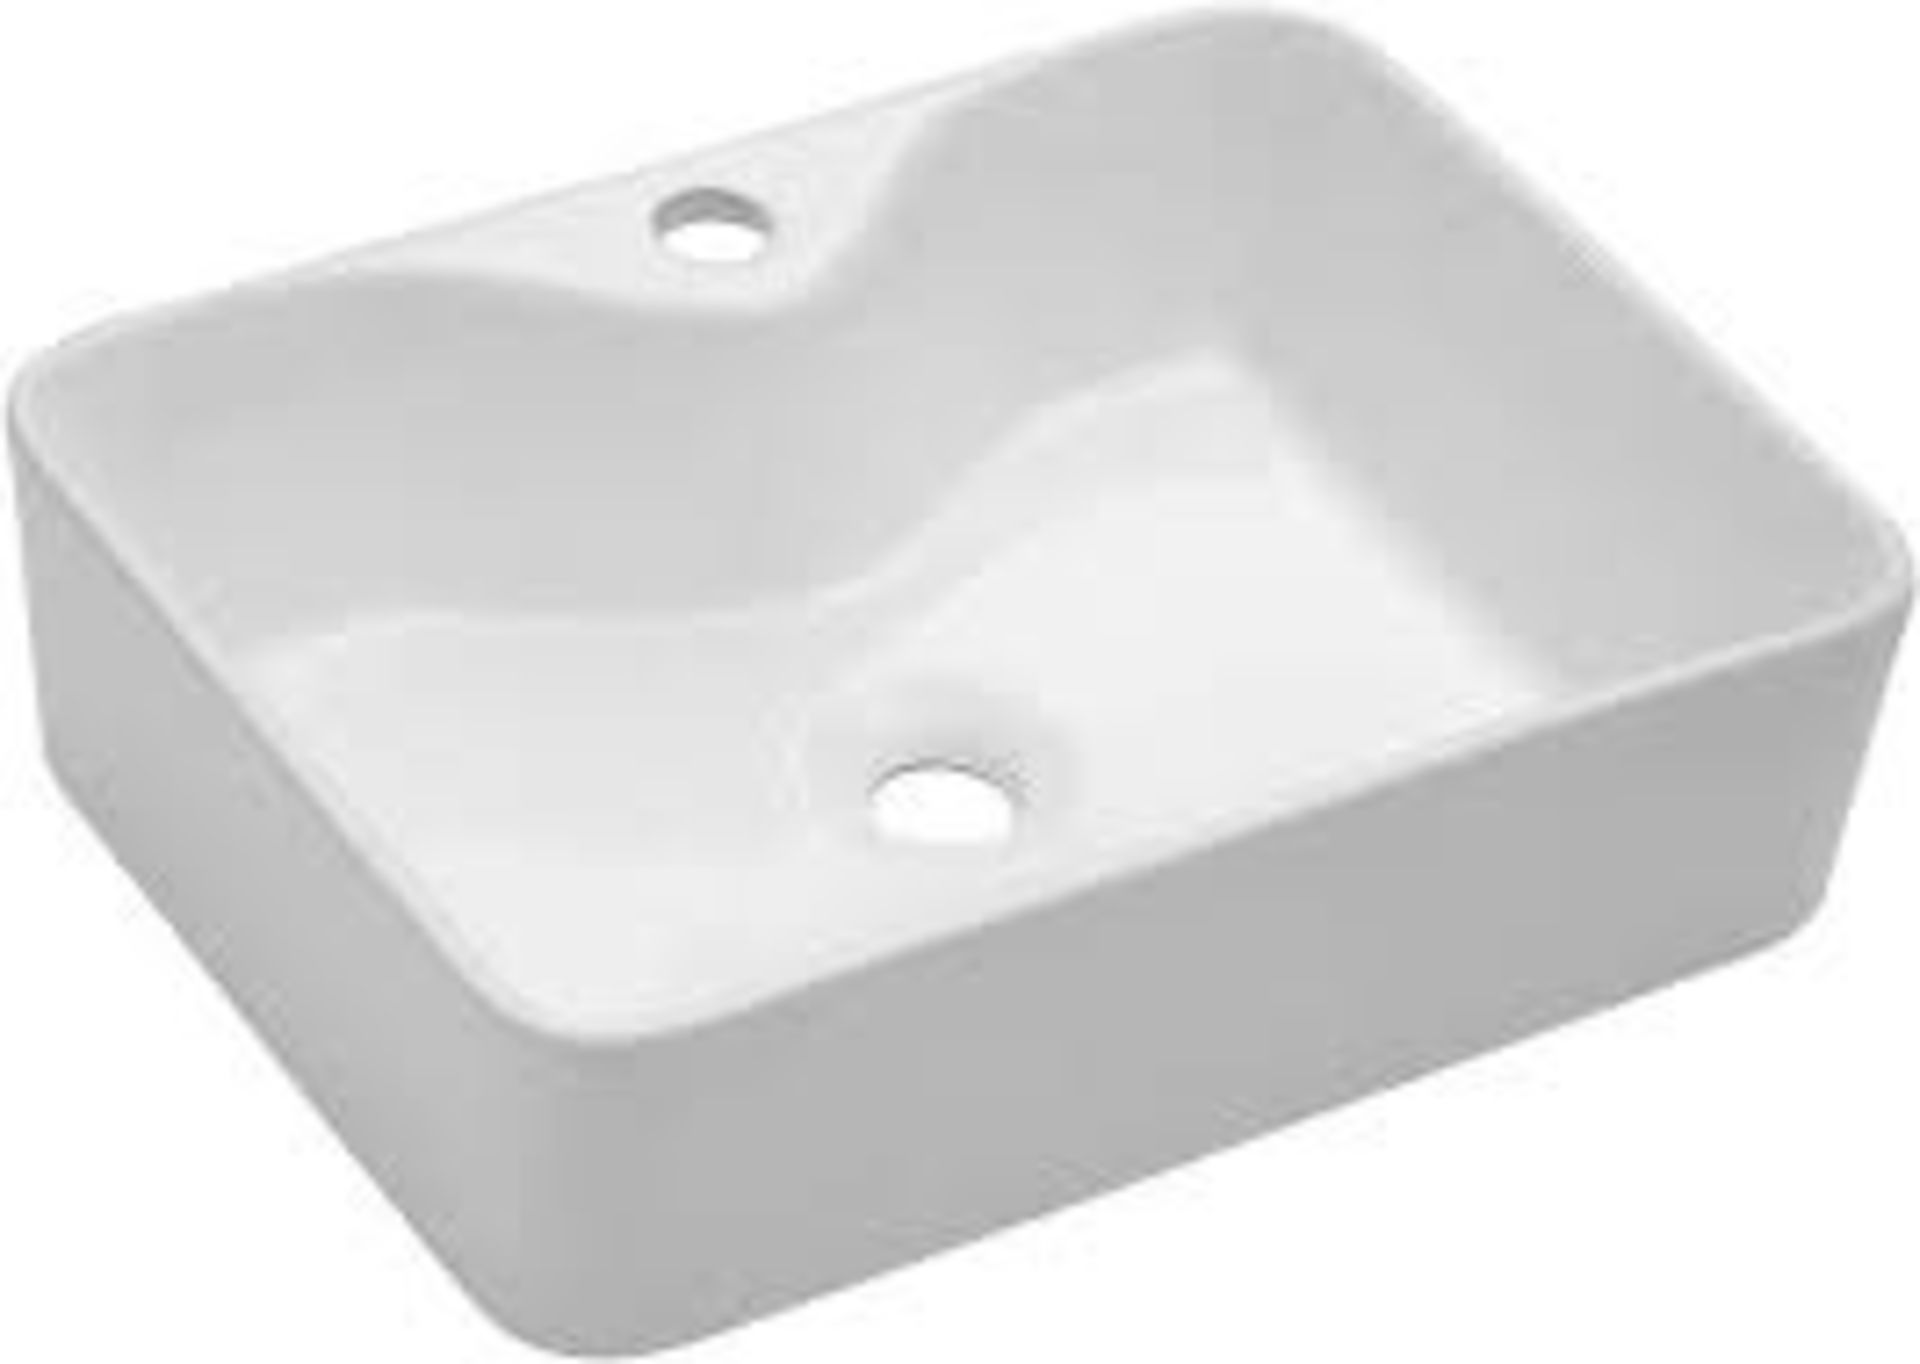 Lordear Bathroom Vessel Sink 19"x15" Rectangle Sink Above Counter White - ER48